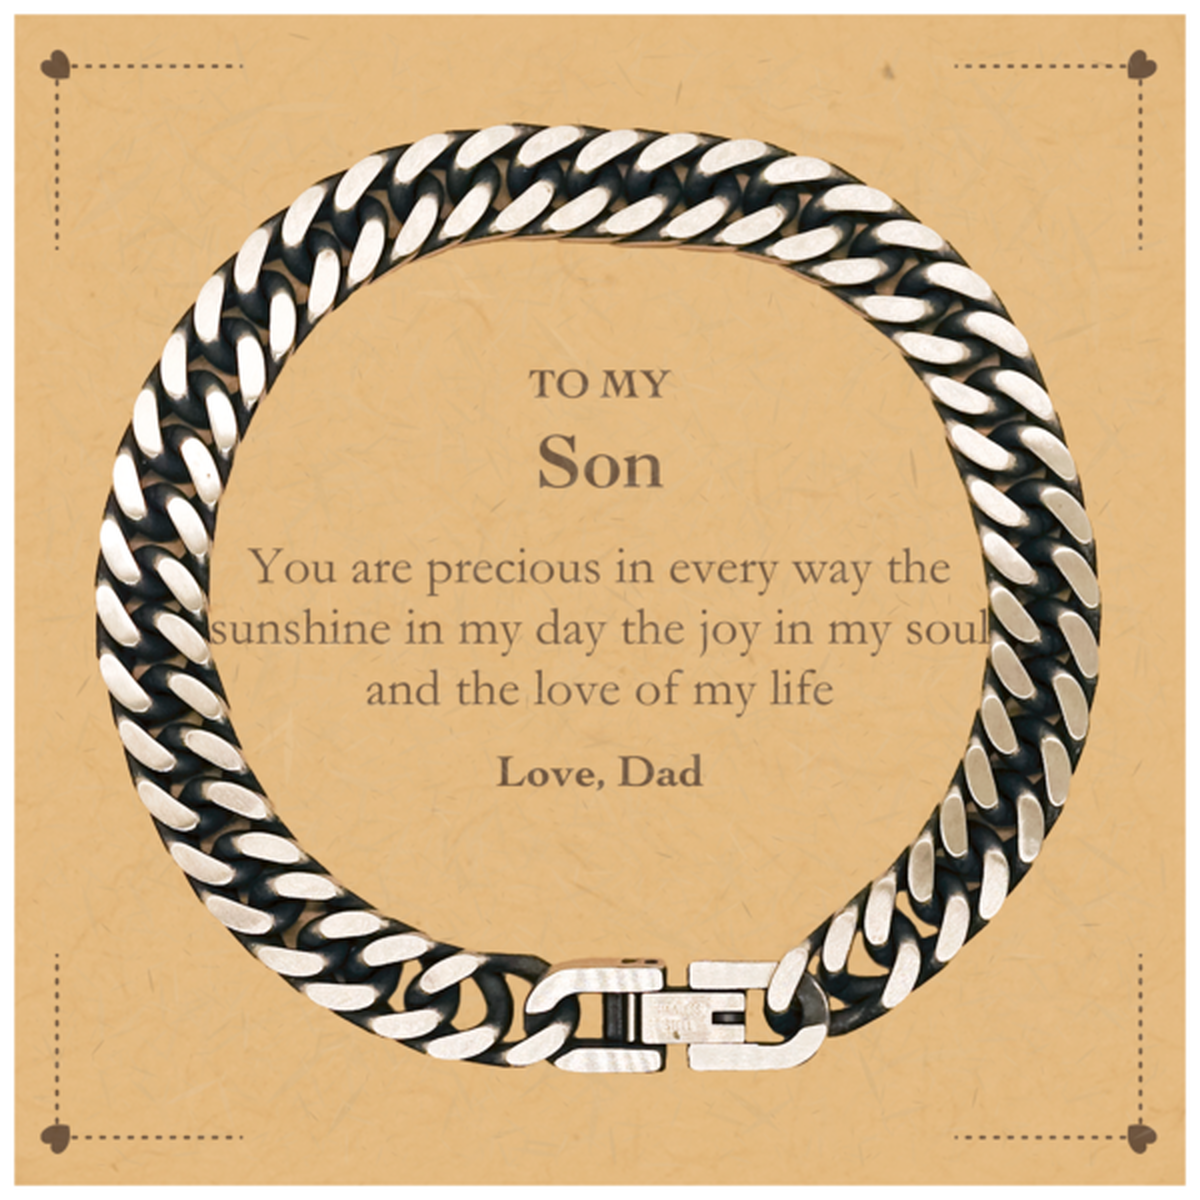 Graduation Gifts for Son Cuban Link Chain Bracelet Present from Dad, Christmas Son Birthday Gifts Son You are precious in every way the sunshine in my day. Love, Dad